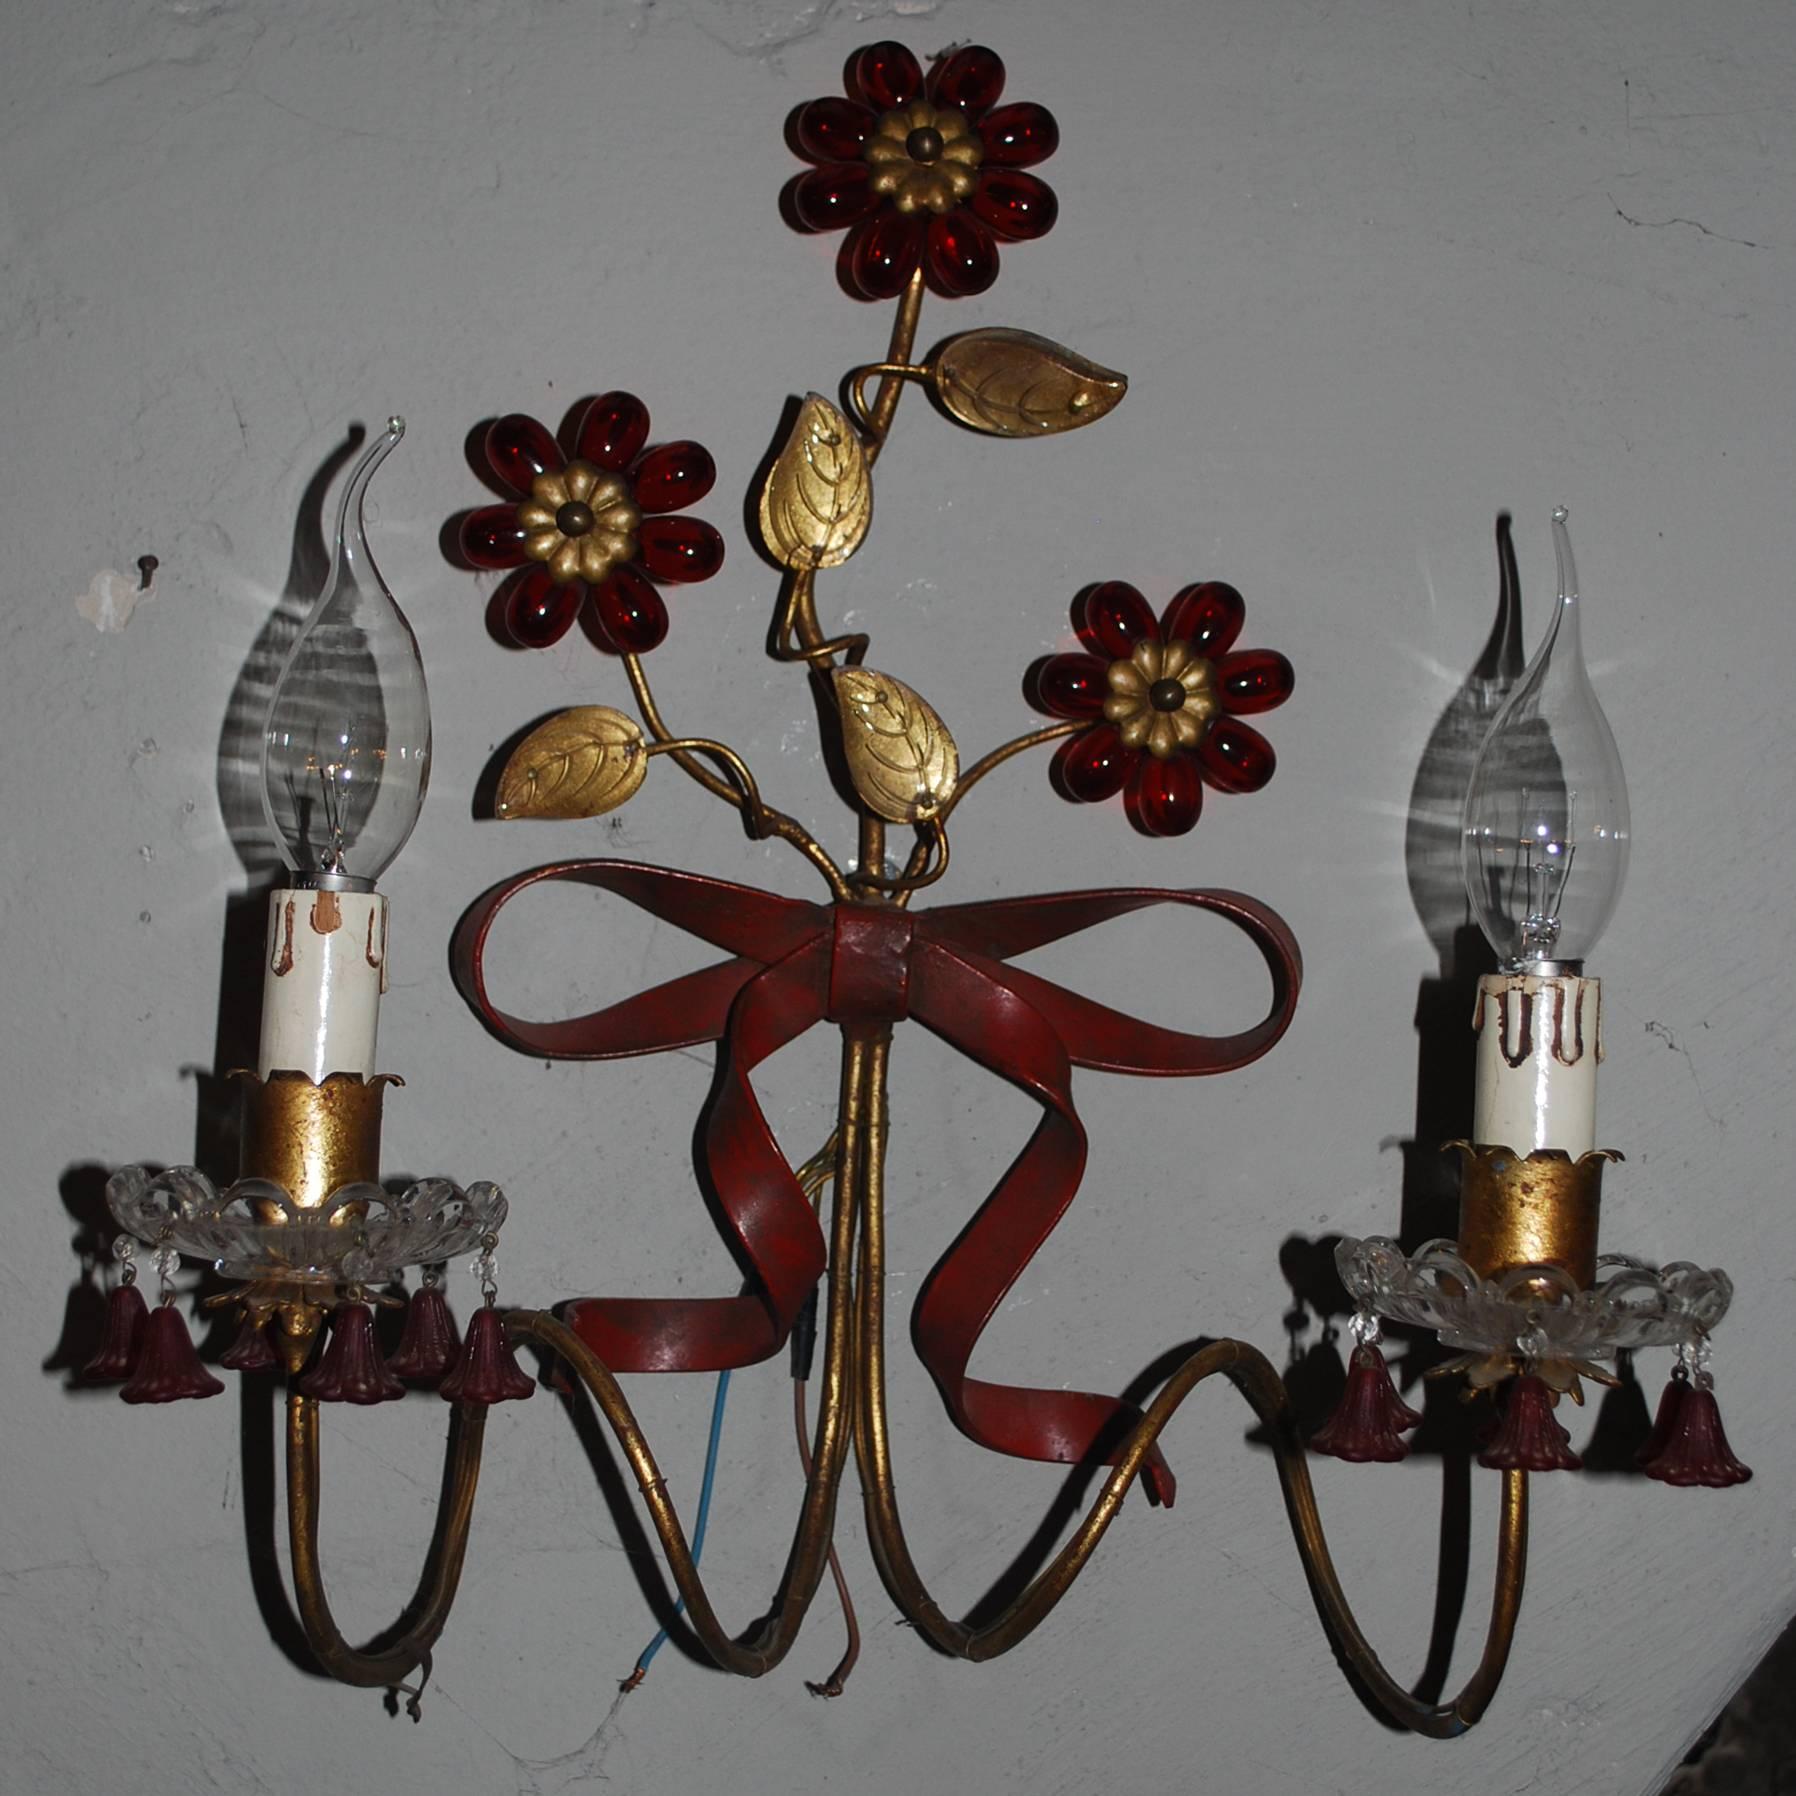 19th century brass and glass wall sconces.
Decorated with brass bow and glass flowers and leafs.
Originates France, dating approximately 1920.
(Shipping costs on request, depends on destination).